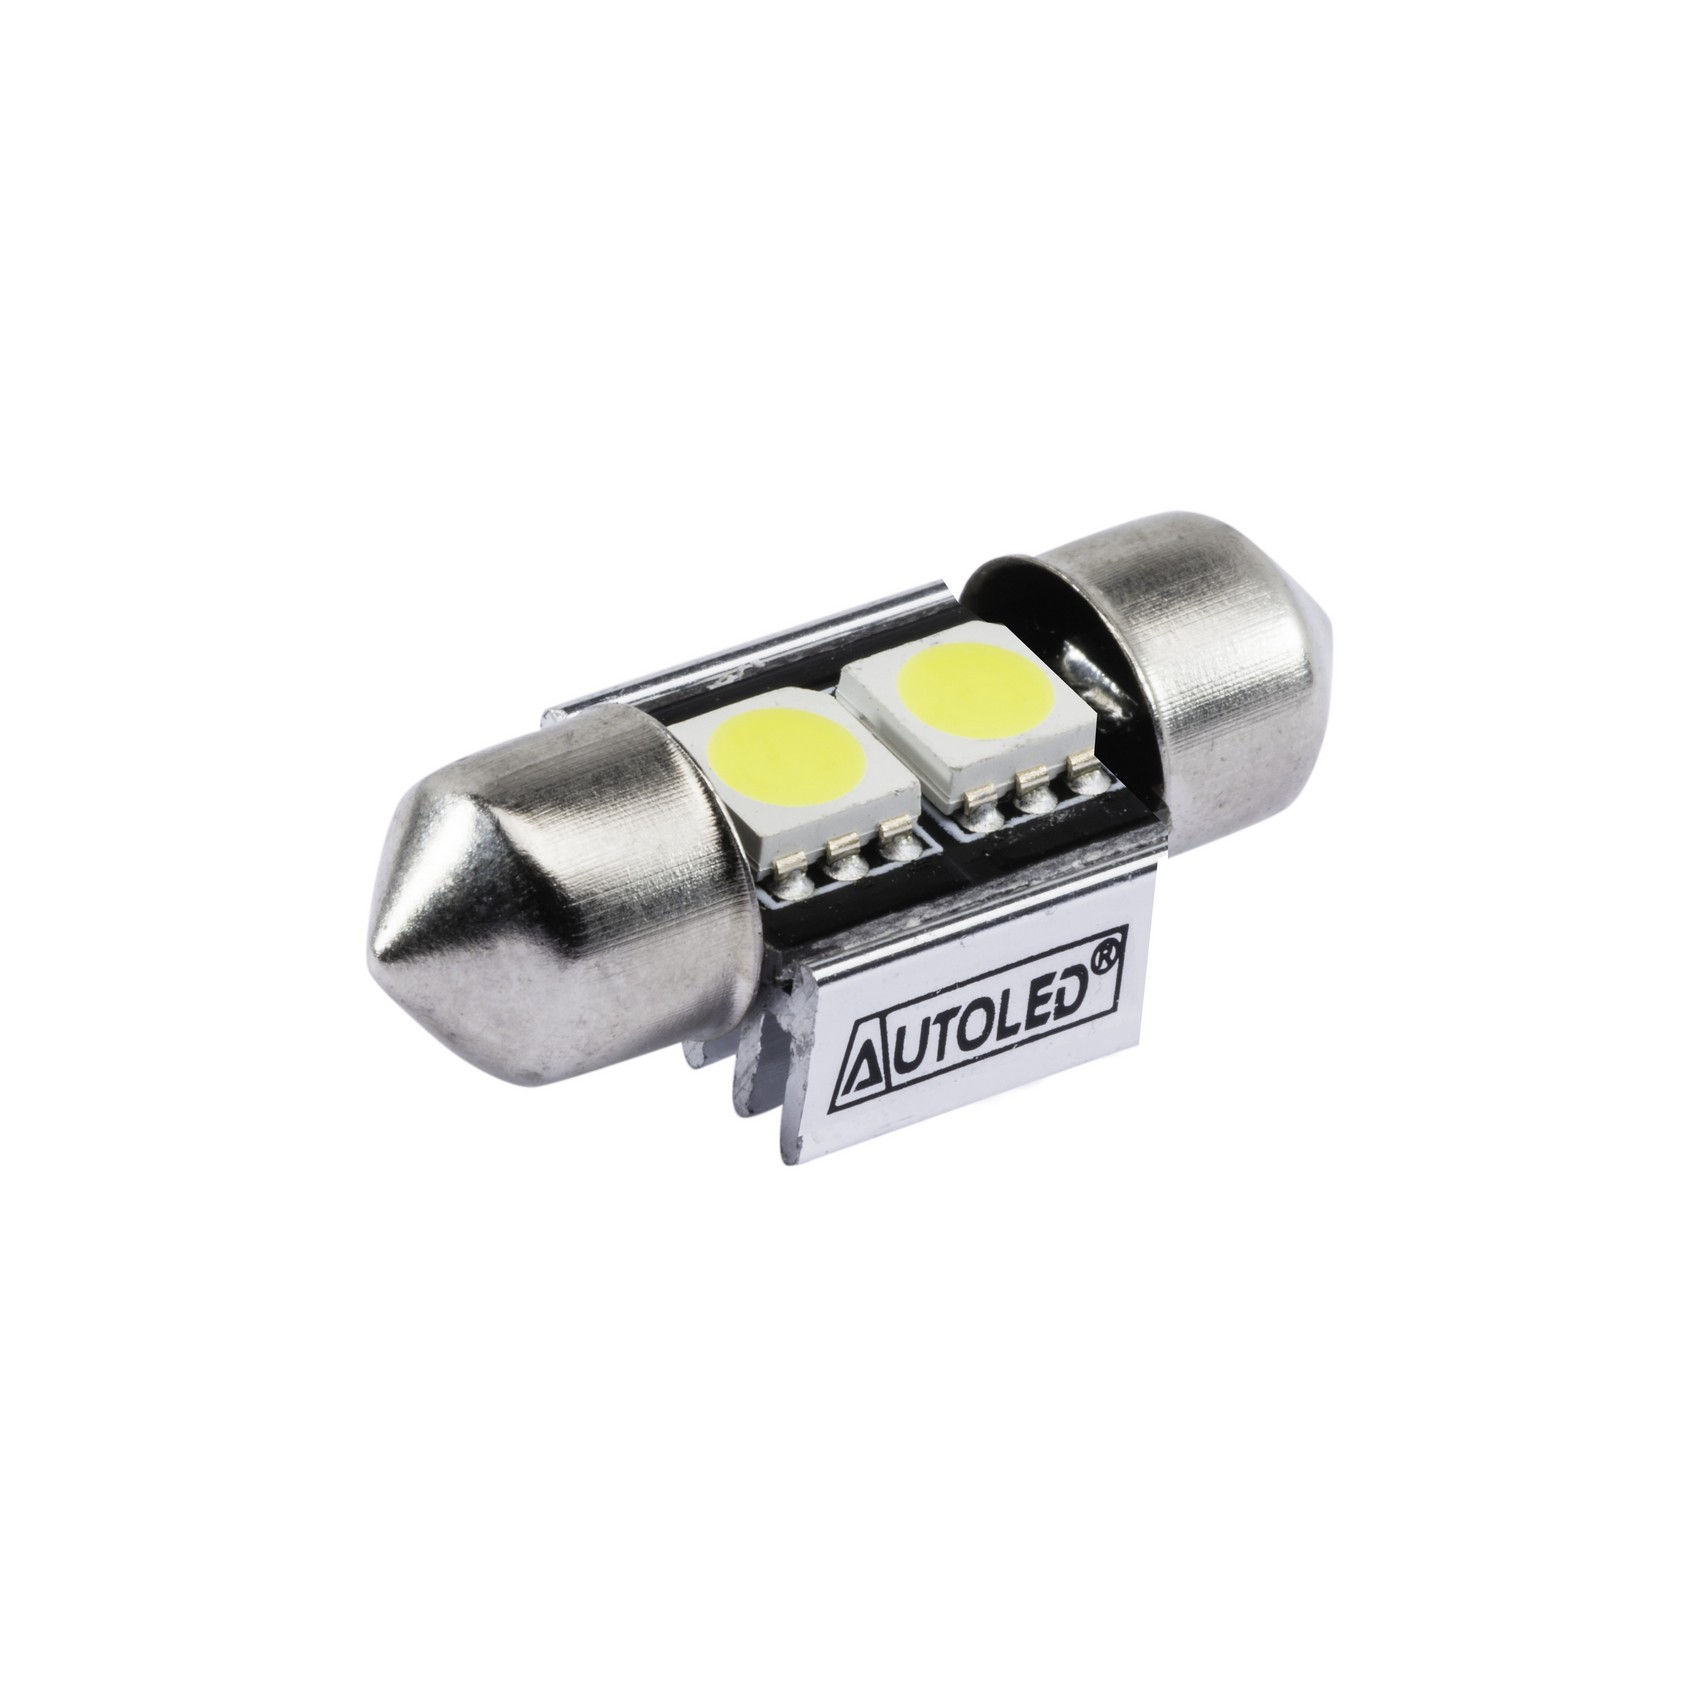 navette-led-31-mm-canbus-autoled-3-leds-smd-5050-blanc-eclairage-interieur-habitacle-plaque-immatriculation-coffre-ref-0010.1